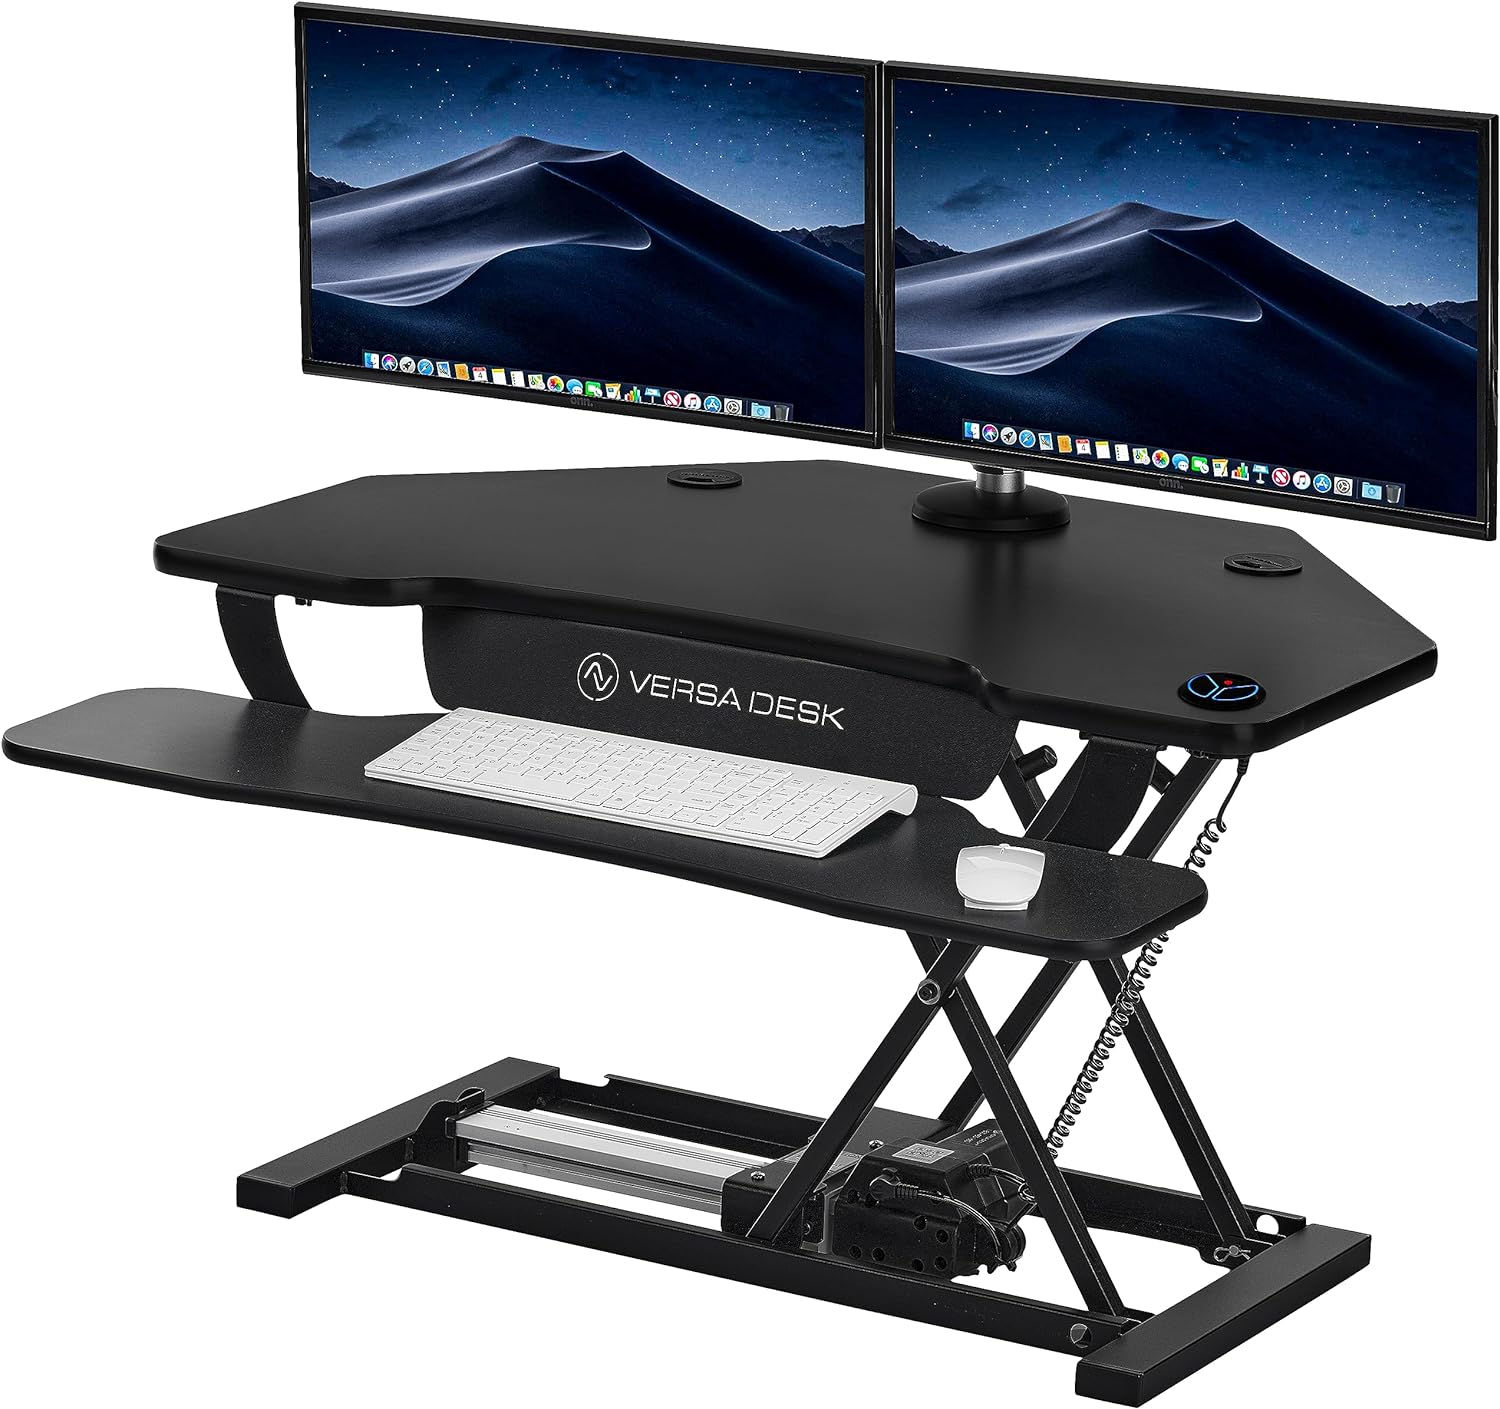 So I cooked this idea up, but couldn't find anyone else on the web that' done it. I'm a full time day trader and had multiple screens, but years sitting behind screens hasn't done my body any favors. Needed a sit stand option, and the Versadesk Pro, with 80lb. capacity was worth a shot. Picked up 2 LG Ultragear 49